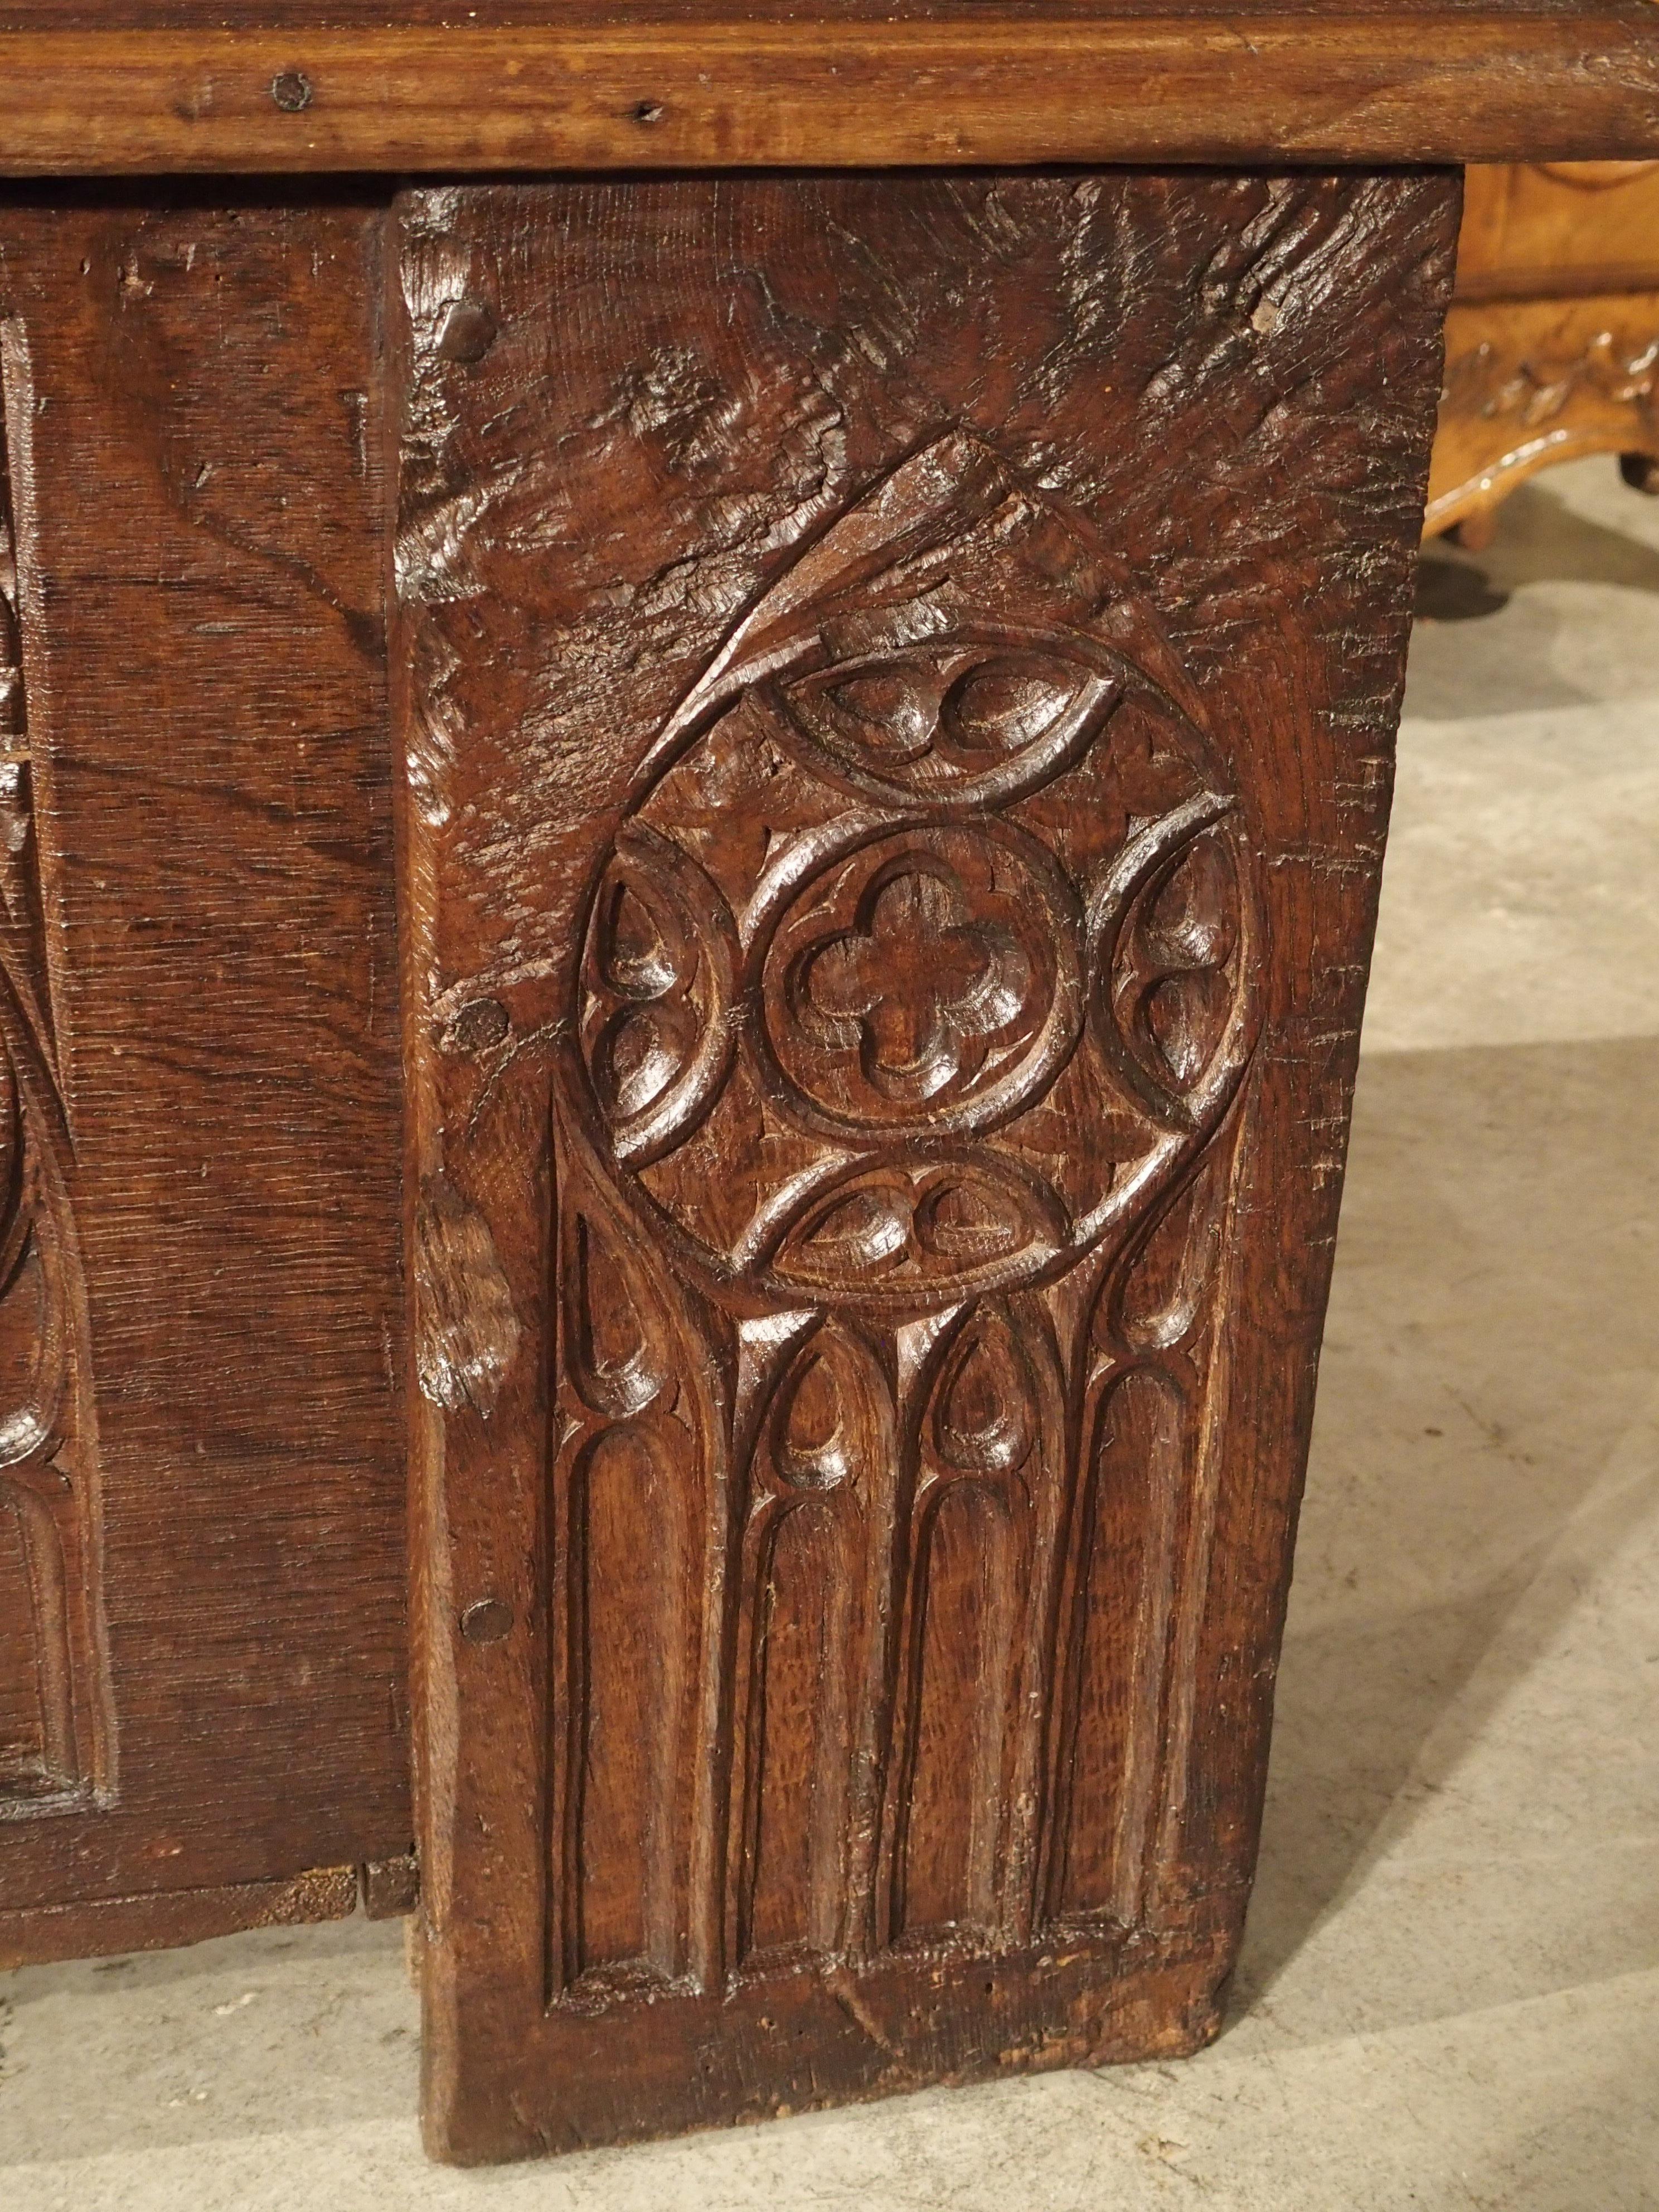 This is an unusually long Gothic style trunk from France, measuring nearly 6.5 feet long. It is carved from thick oak planks, and it dates to circa 1800. The trunk has well carved characteristic Gothic ornamentation on all of the front panels, while